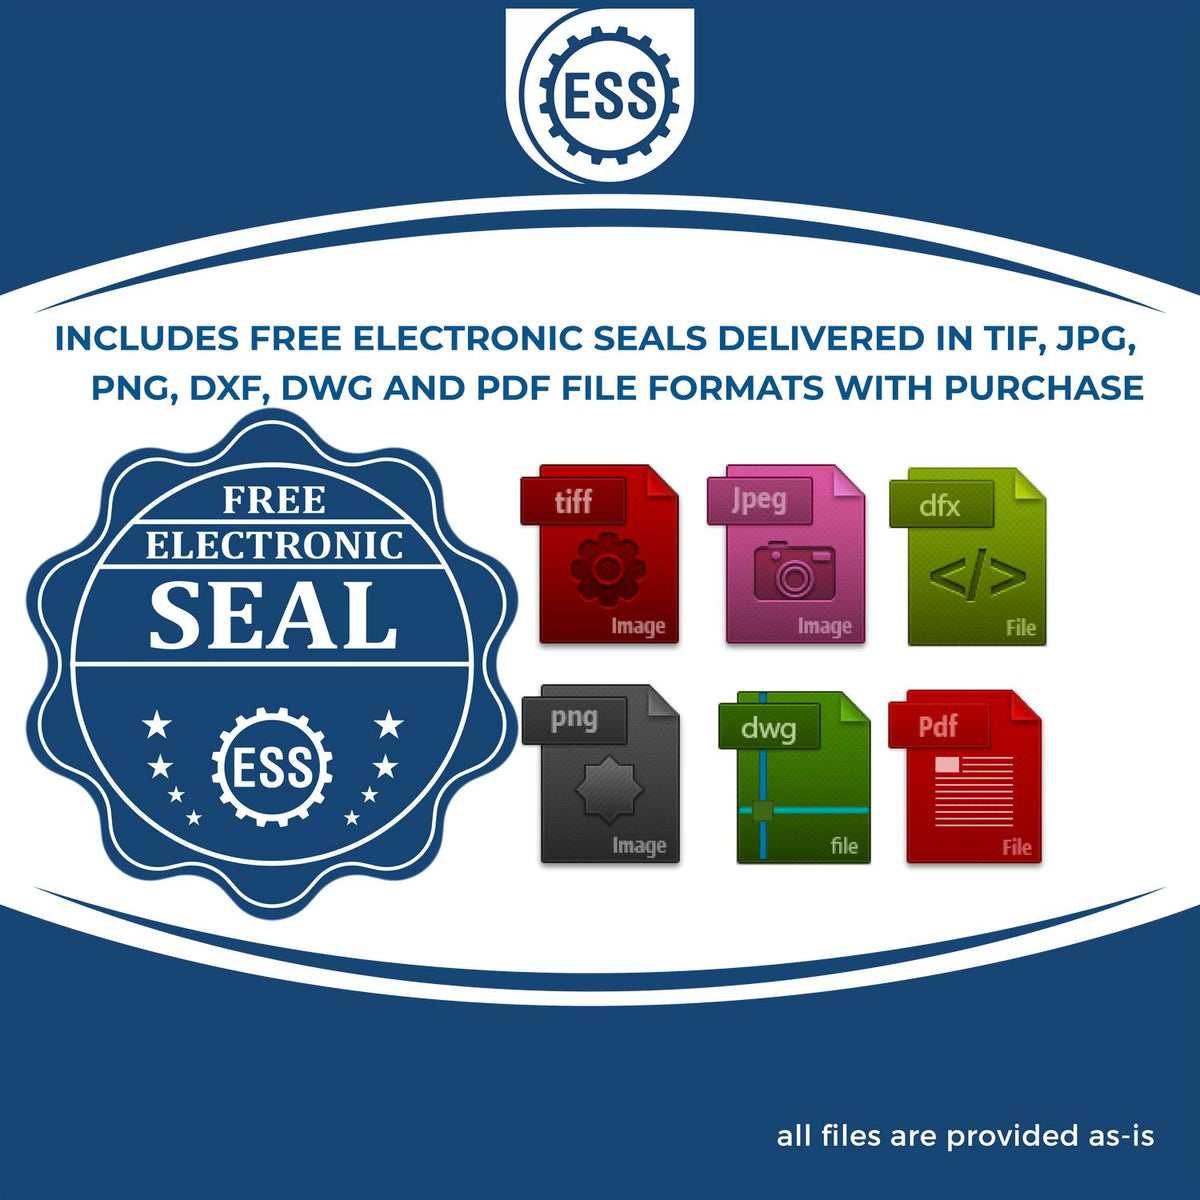 An infographic for the free electronic seal for the Premium MaxLight Pre-Inked New Jersey Engineering Stamp illustrating the different file type icons such as DXF, DWG, TIF, JPG and PNG.